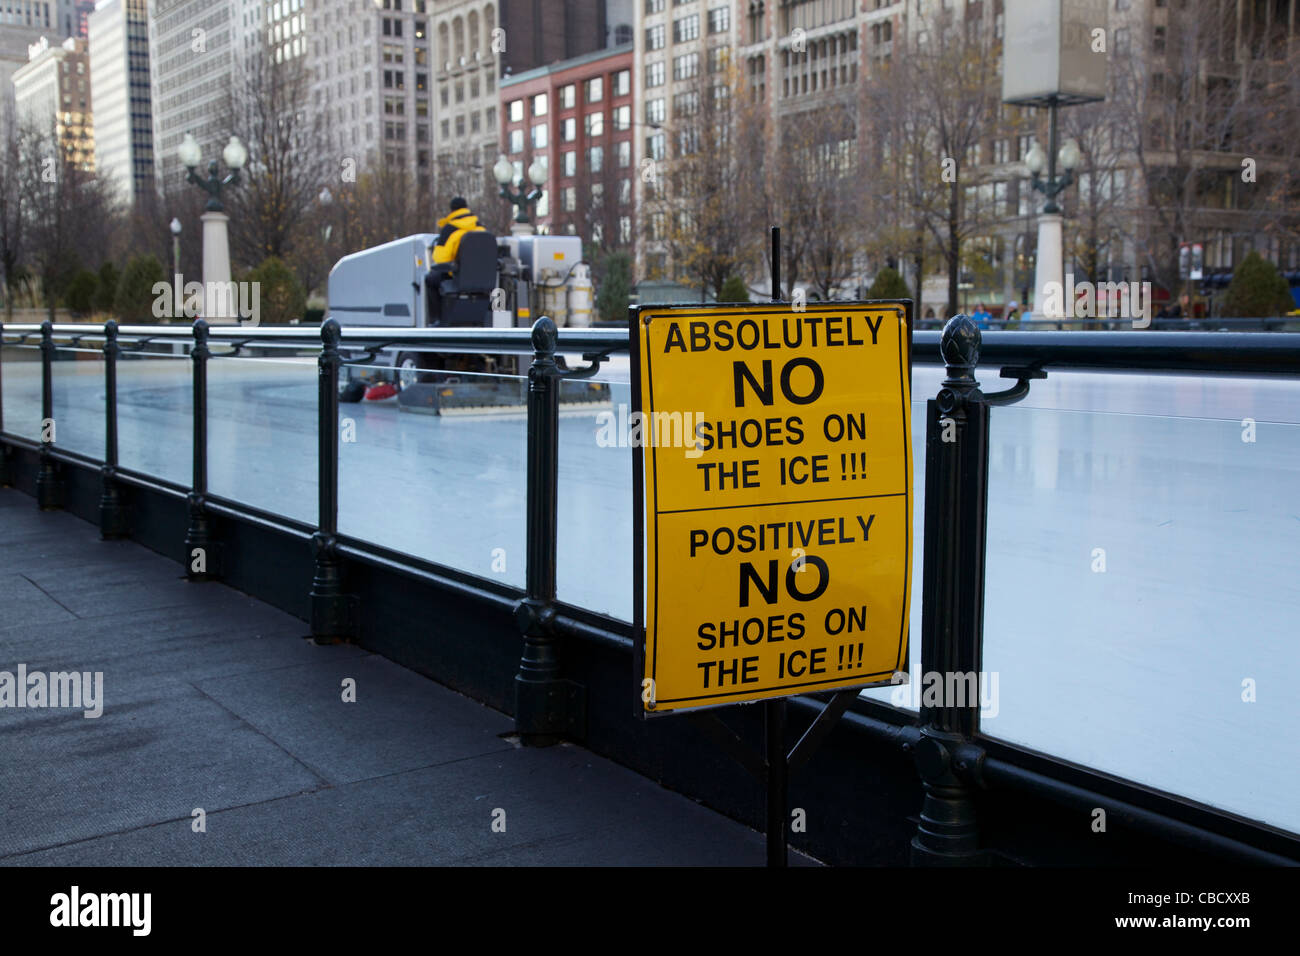 No shoes on ice sign Millennium Park Ice Rink grooming machine Chicago  Illinois Stock Photo - Alamy